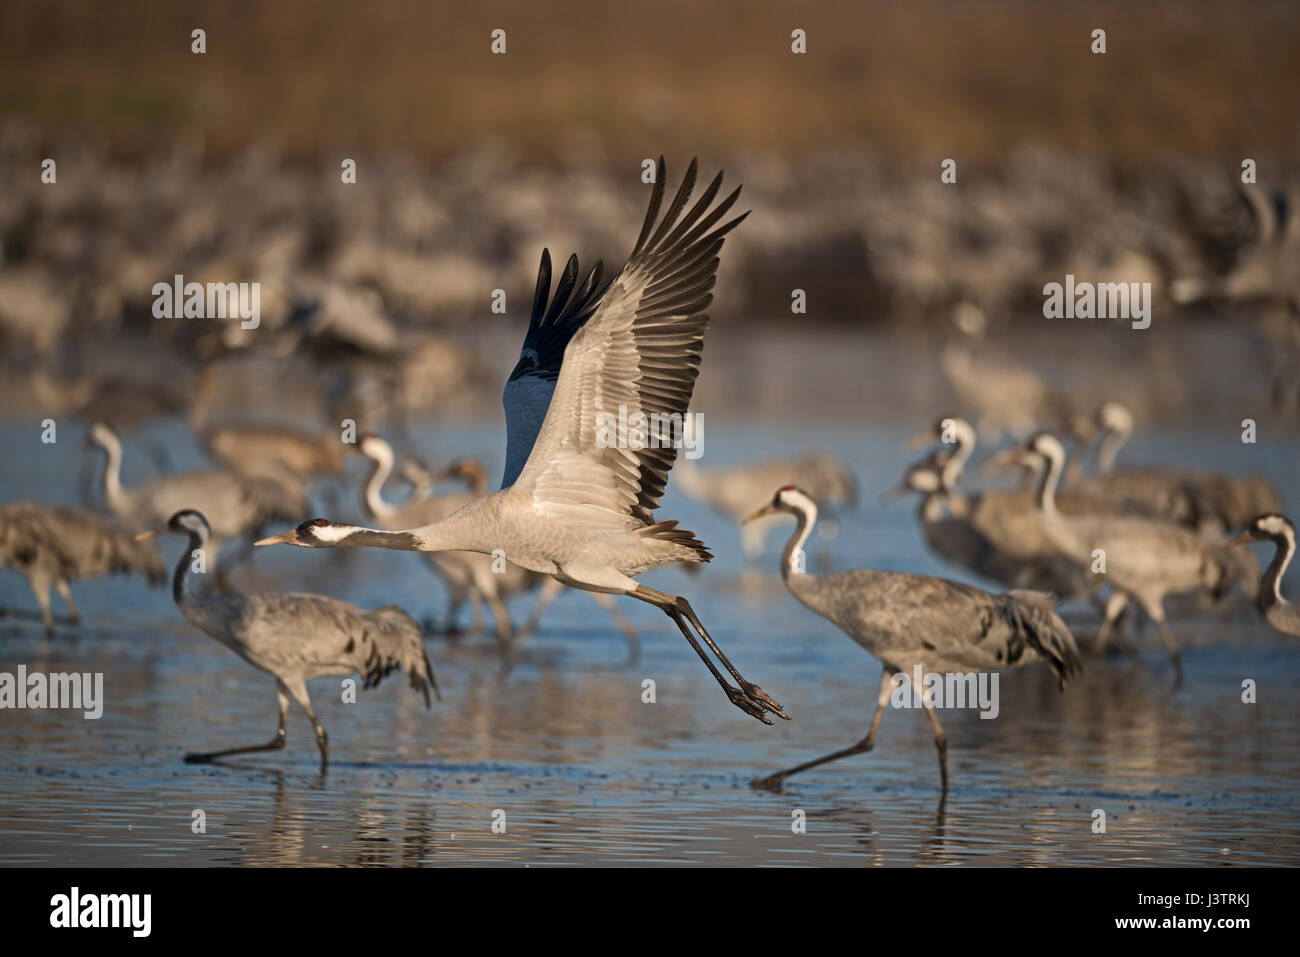 Common Cranes Grus grus, wintering at  the Hula Lake Park, Hula Valley Northern Israel.  Farmers spread 8 tons of Maize a day on to the marsh to keep Stock Photo